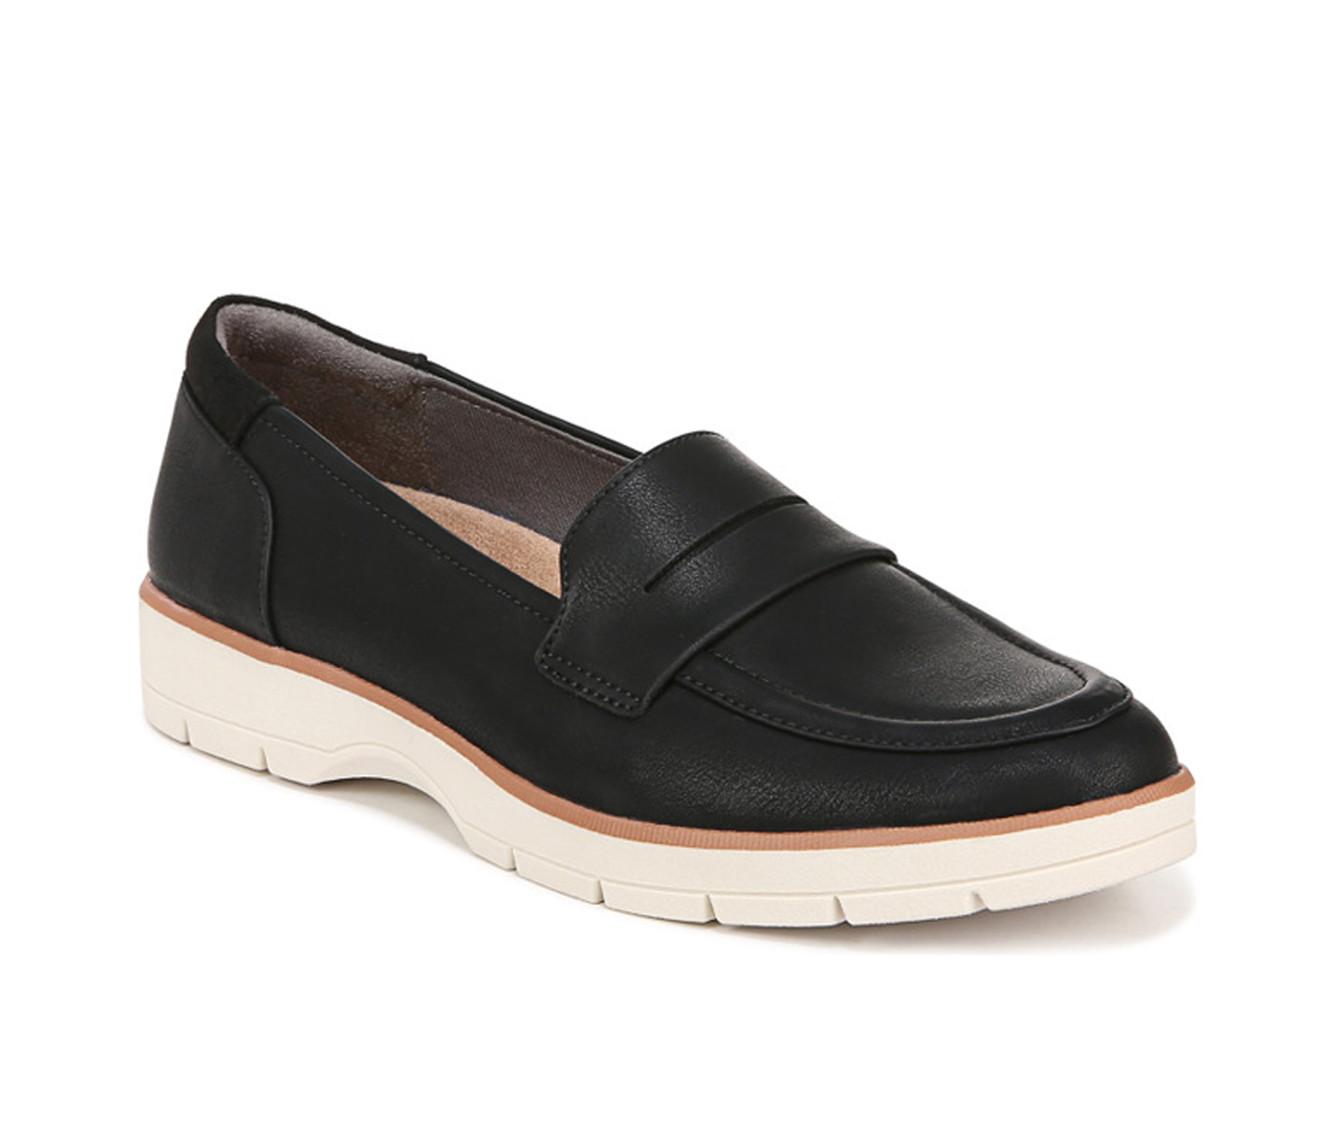 Women's Dr. Scholls Nice Day Shoes